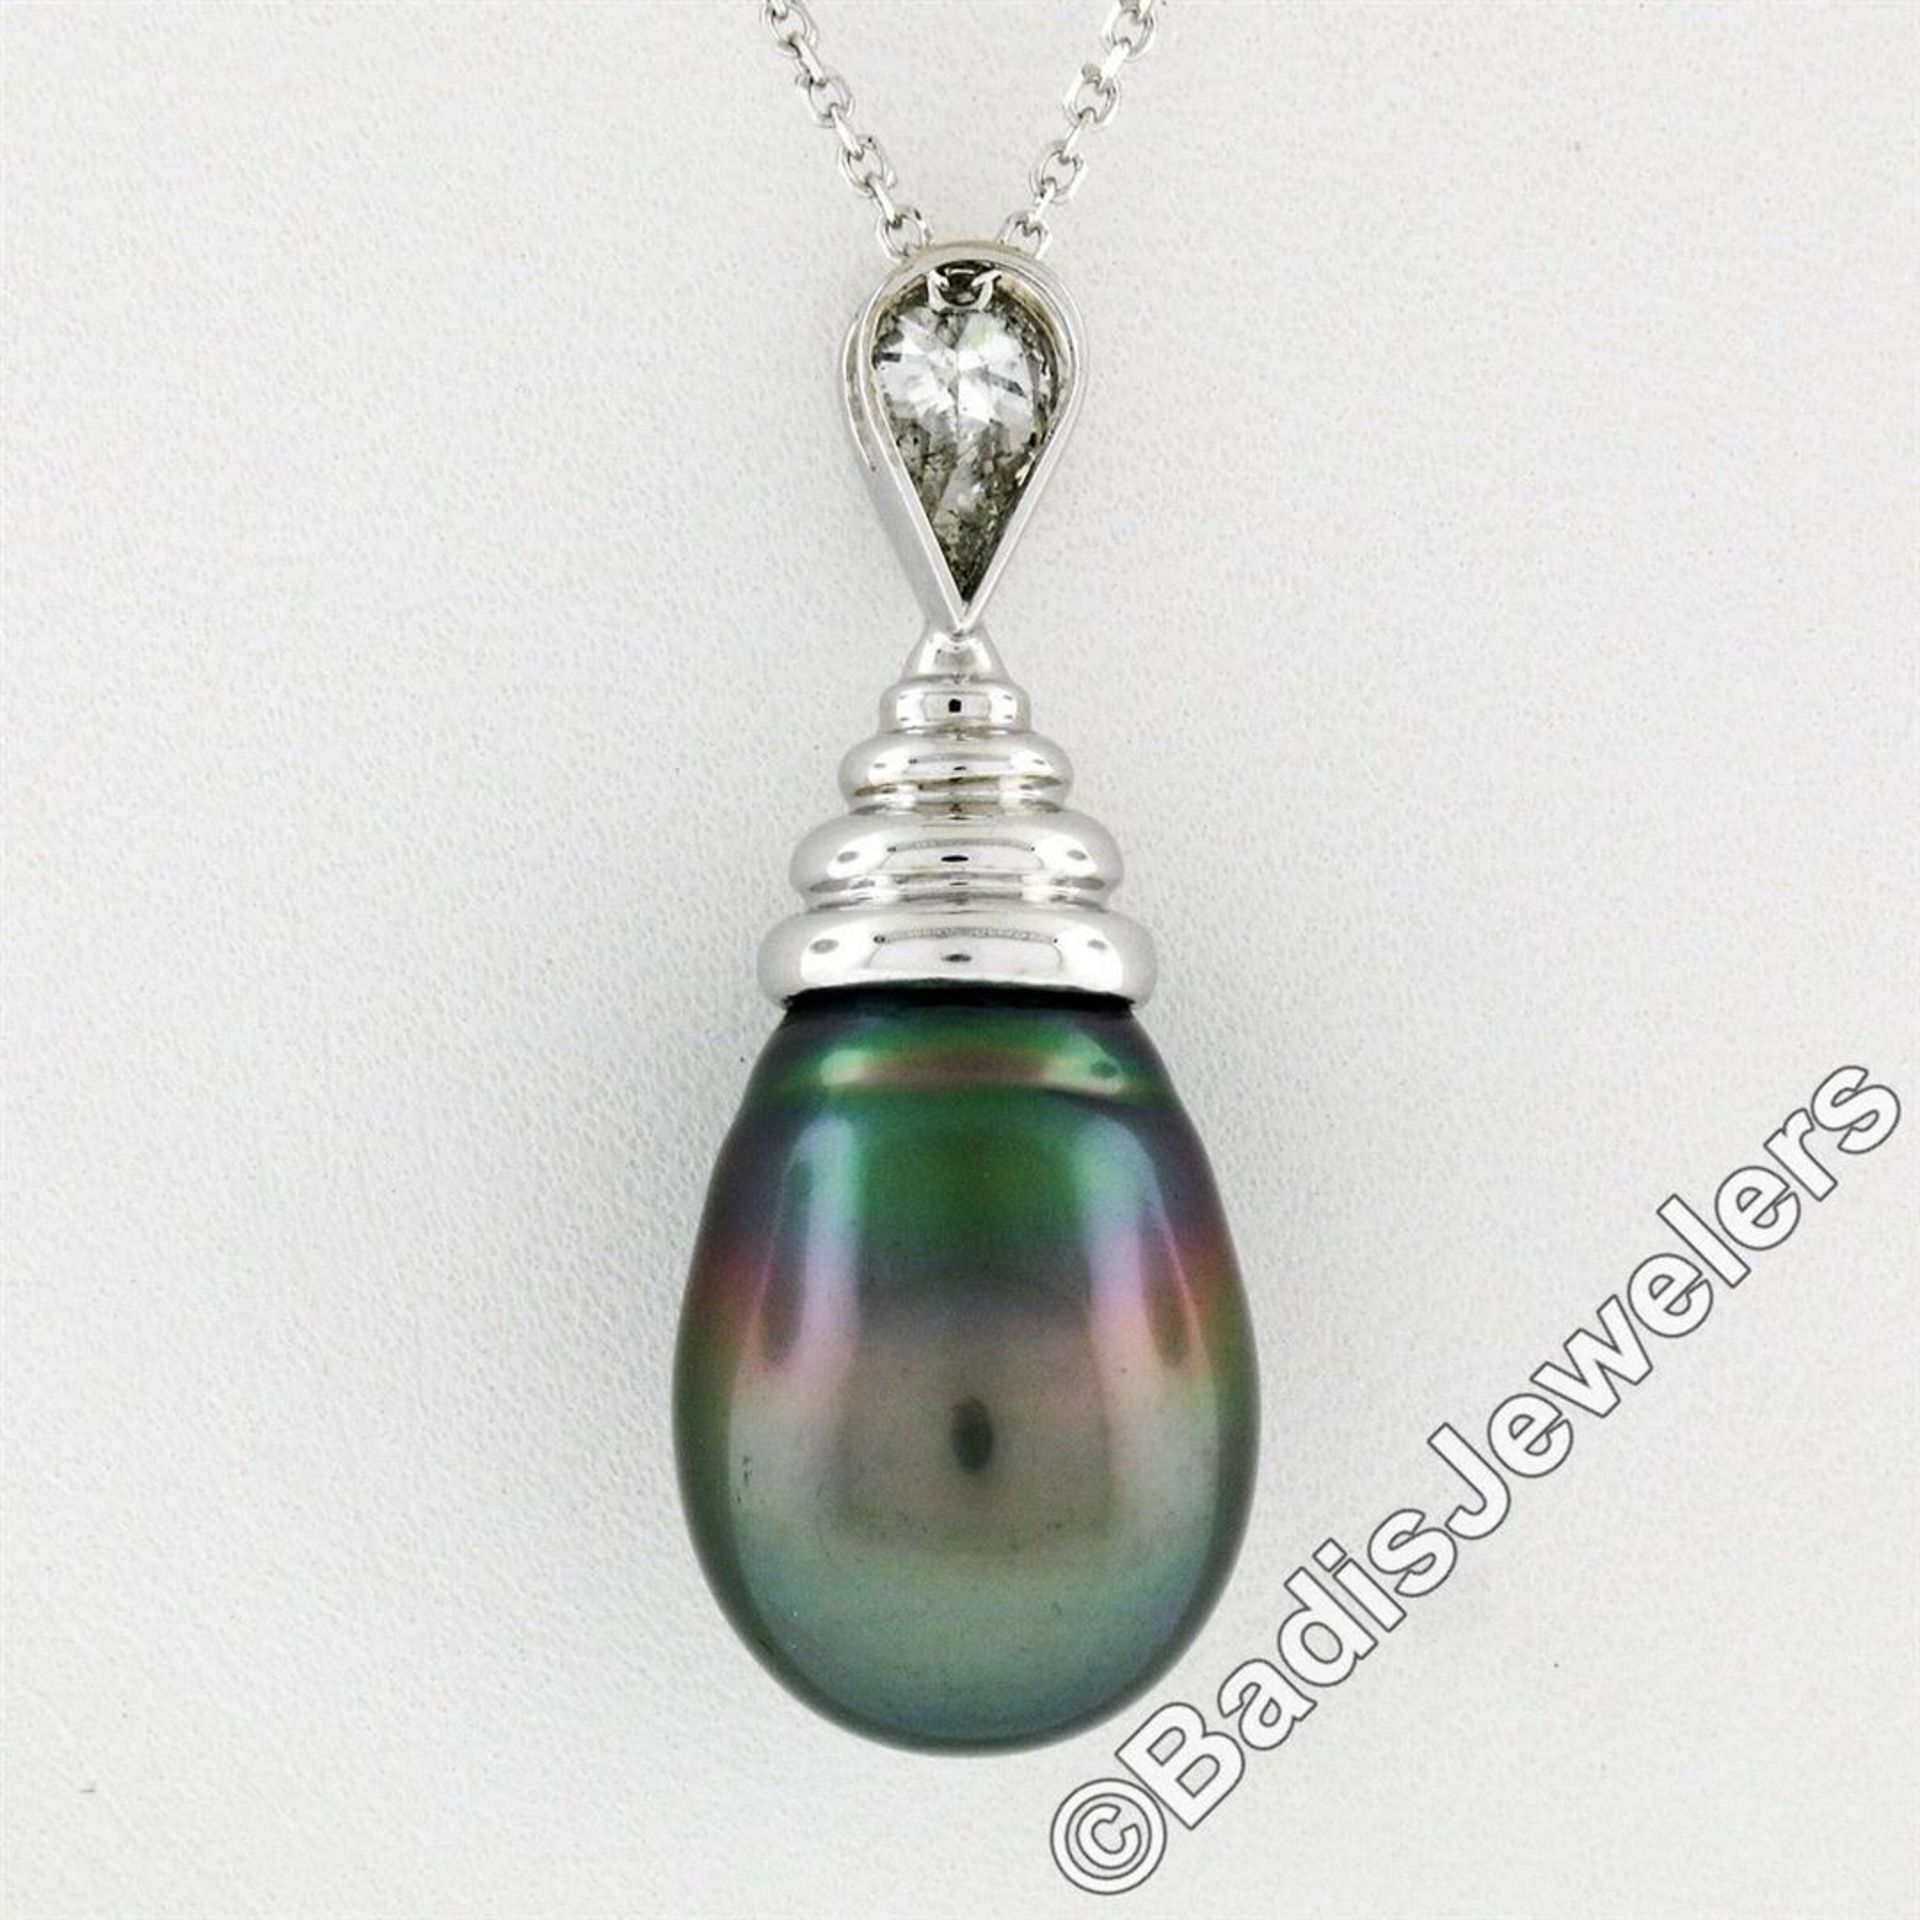 18kt White Gold Tahitian Black Pearl and 0.60 ct Diamond Pendant Necklace - Image 6 of 7